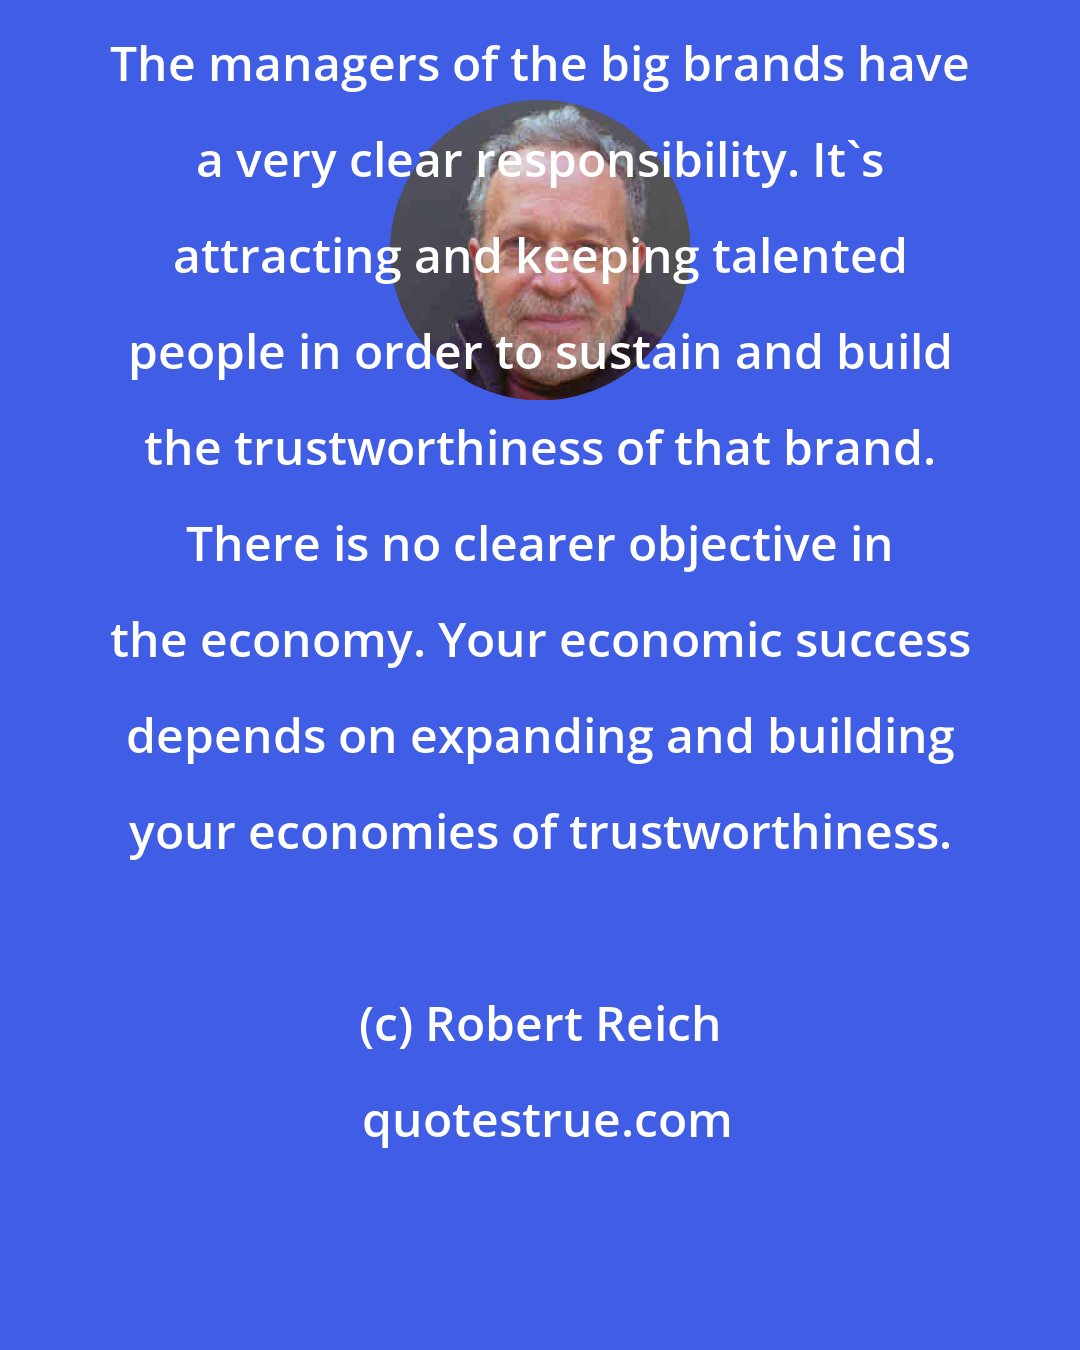 Robert Reich: The managers of the big brands have a very clear responsibility. It's attracting and keeping talented people in order to sustain and build the trustworthiness of that brand. There is no clearer objective in the economy. Your economic success depends on expanding and building your economies of trustworthiness.